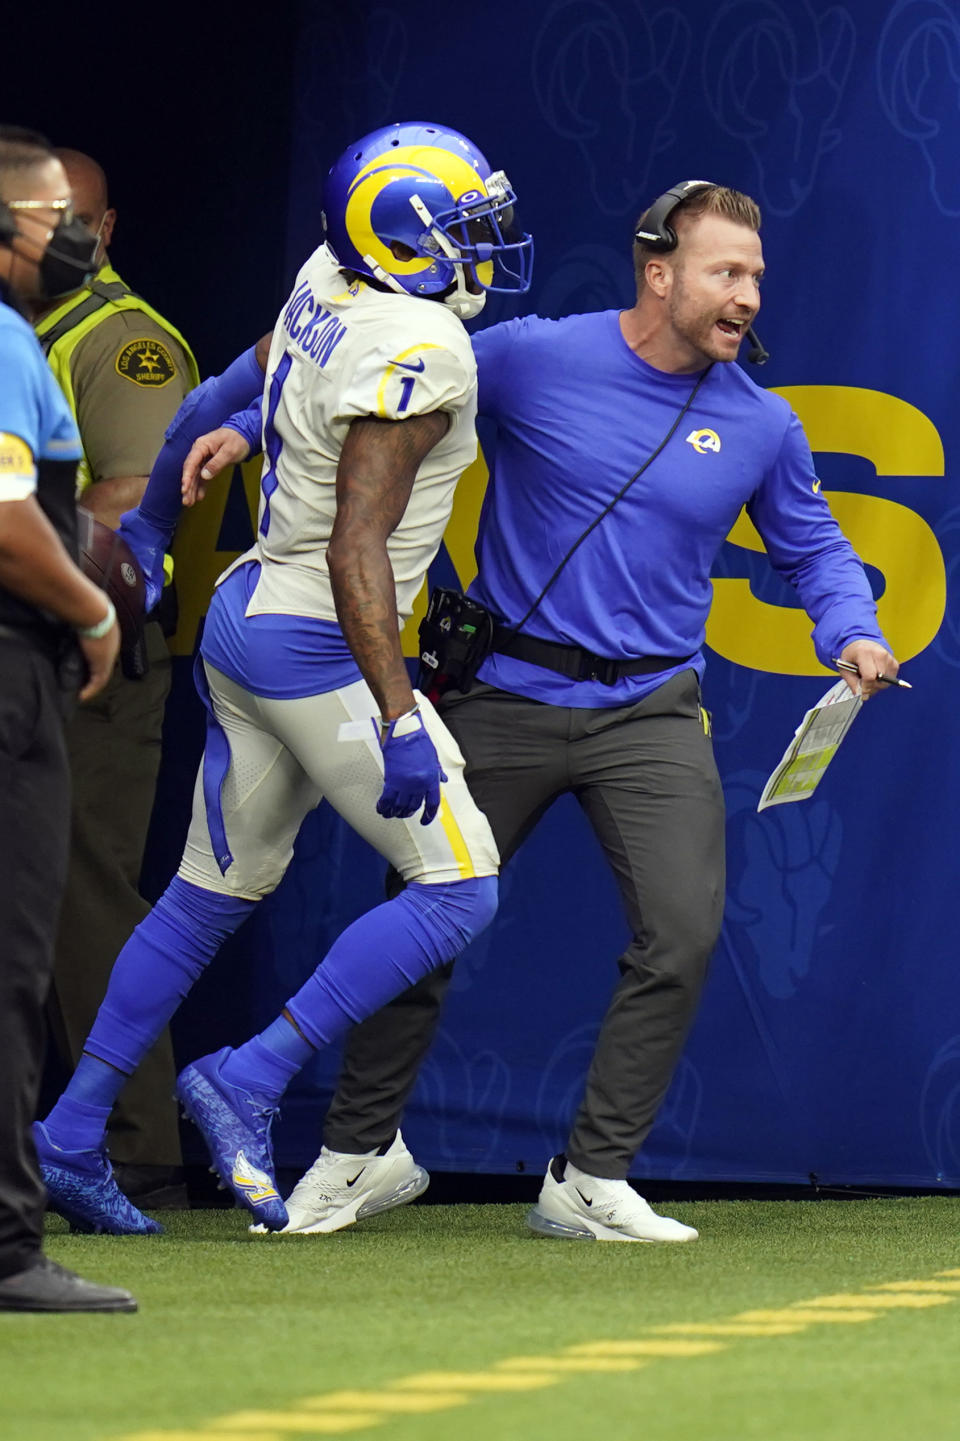 Los Angeles Rams wide receiver DeSean Jackson, left, celebrates his touchdown catch with head coach Sean McVay during the second half of an NFL football game against the Tampa Bay Buccaneers Sunday, Sept. 26, 2021, in Inglewood, Calif. (AP Photo/Jae C. Hong)